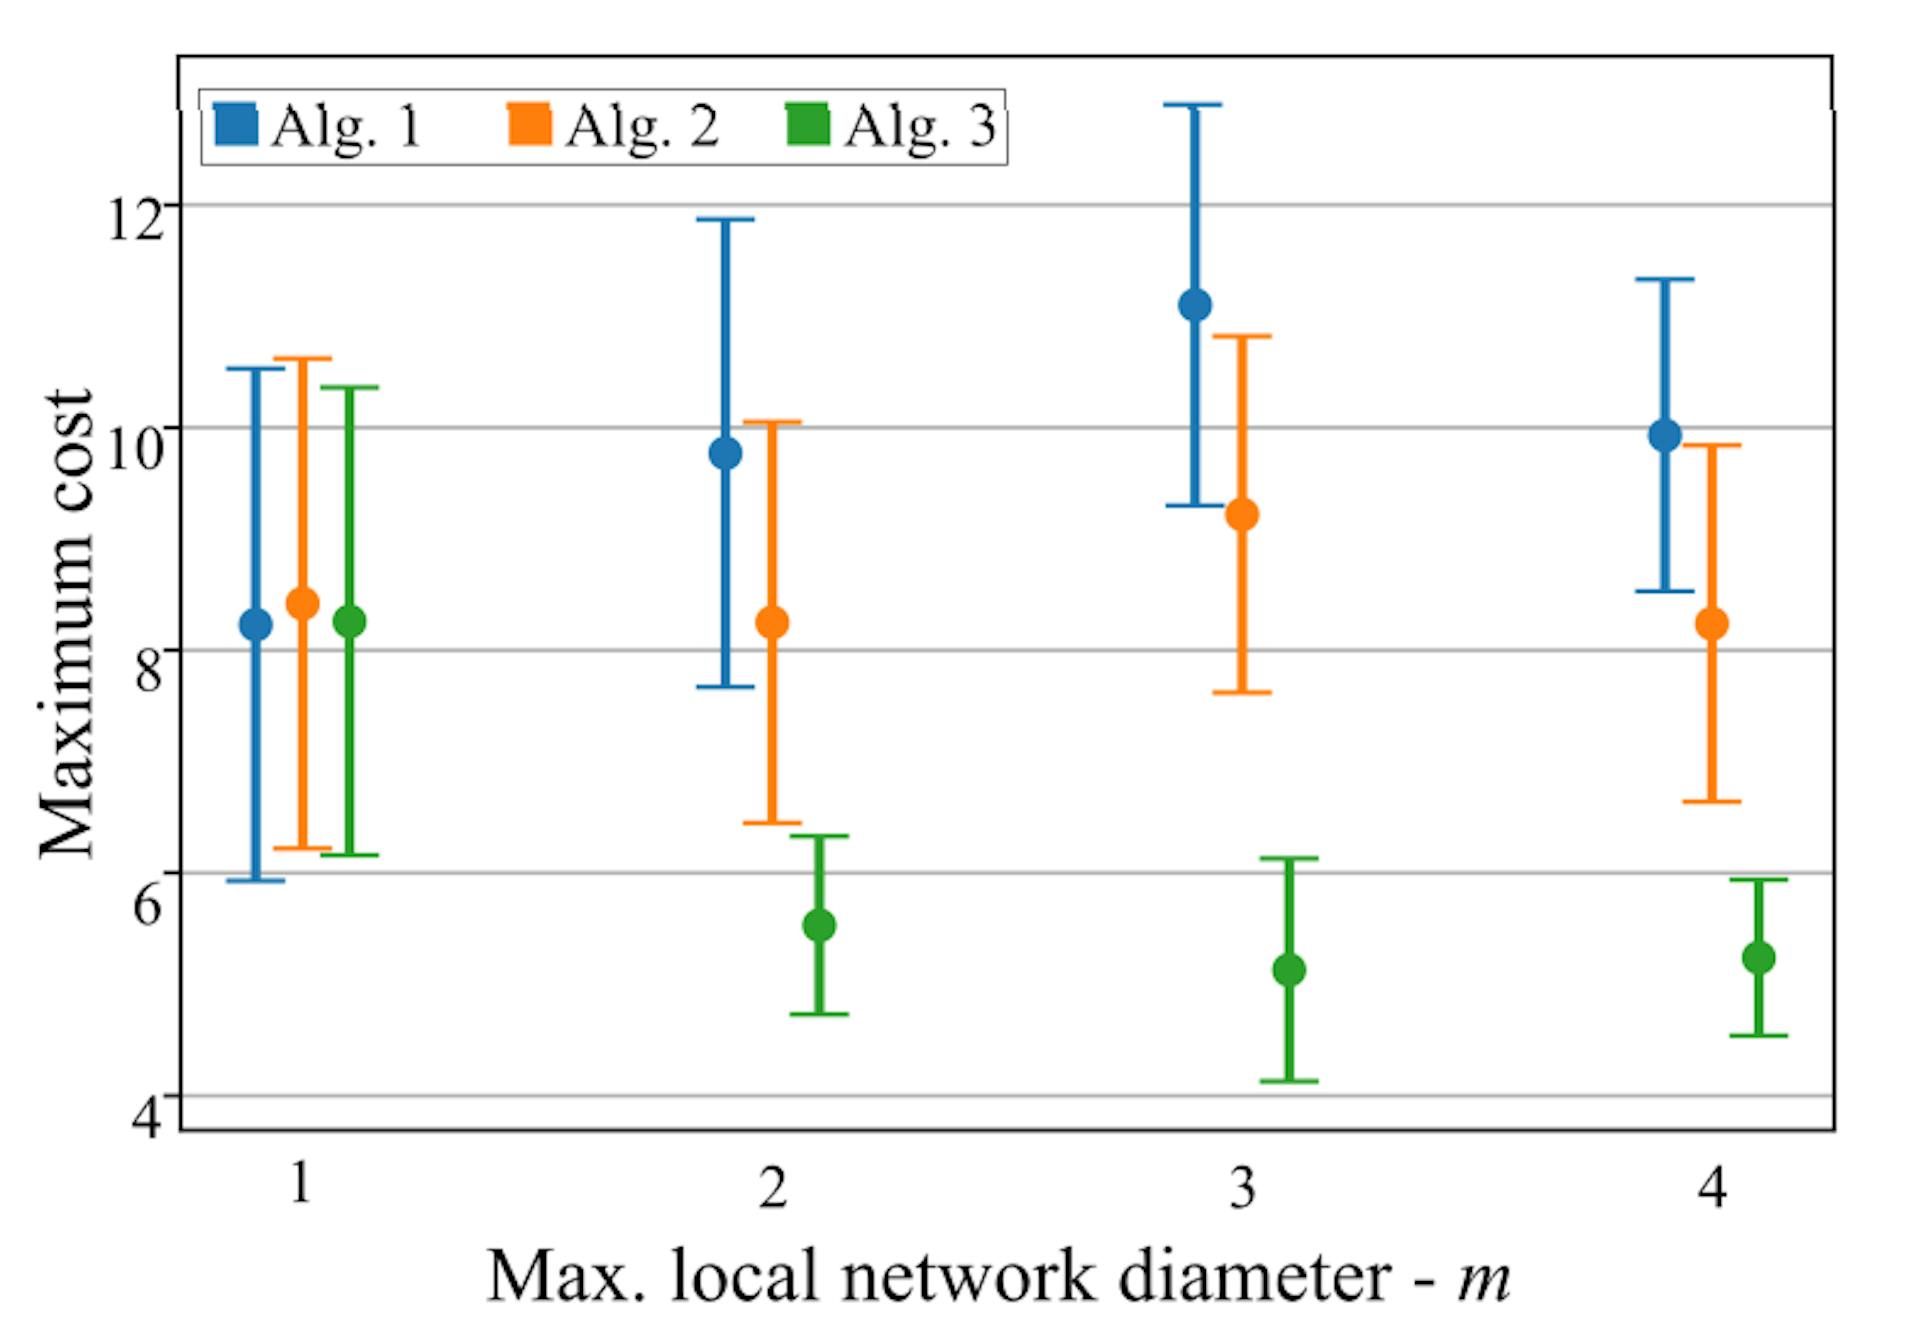 Fig. 2: Comparison of three different prebunking policiesinduced by Algorithms 1, 2, and 3 across different spatial